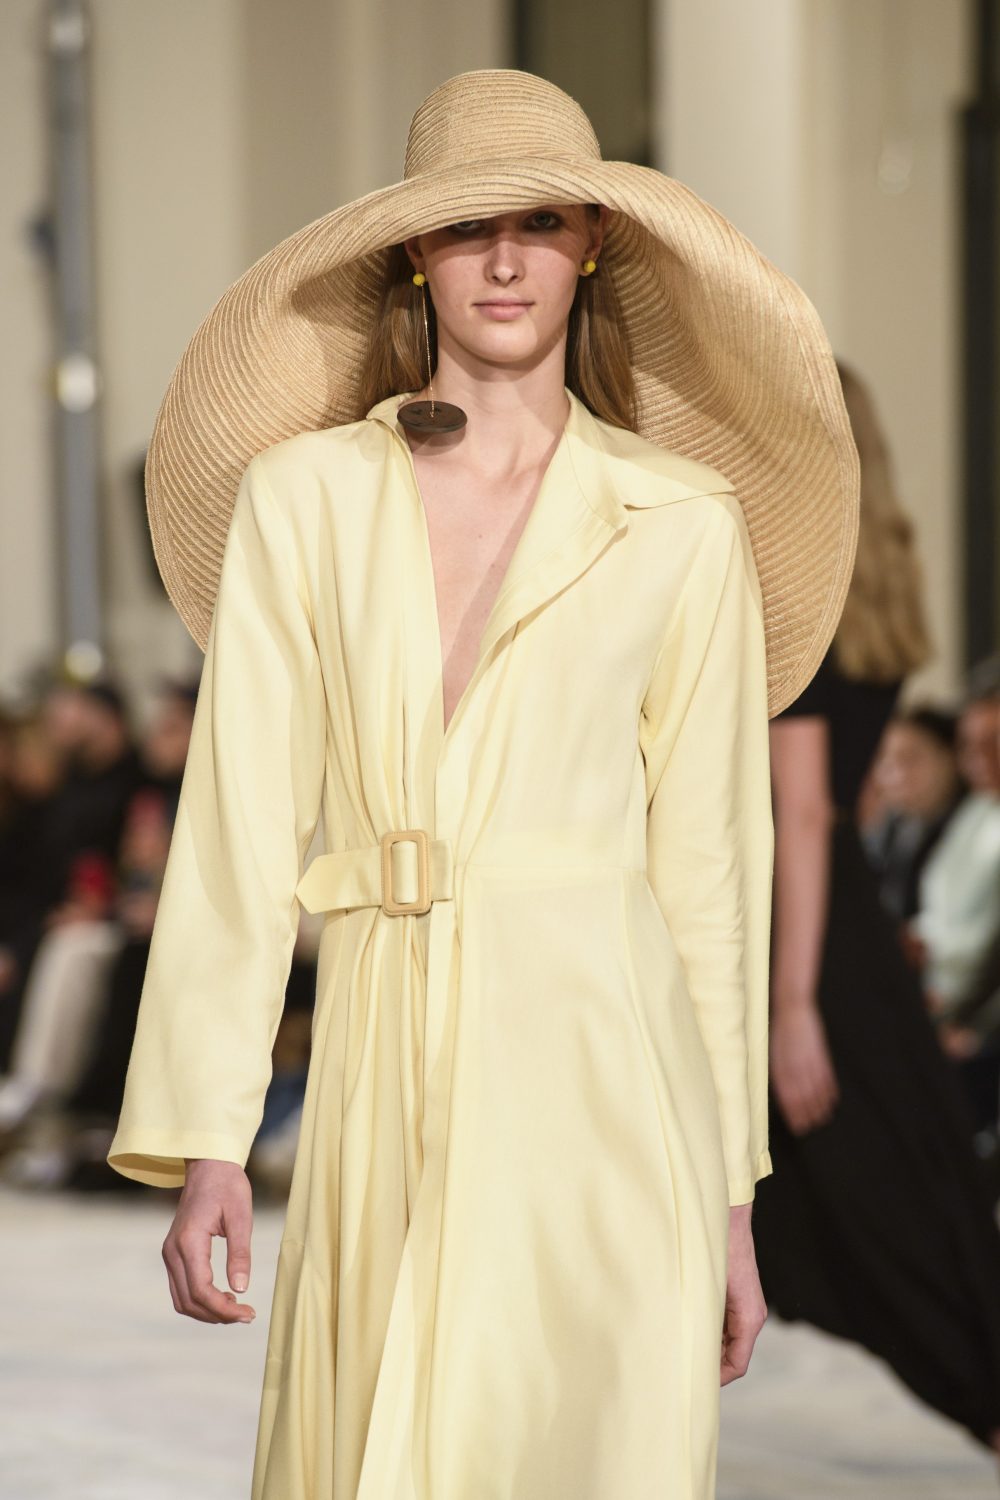 Oversized Hats Are Big News, Fashion Trends